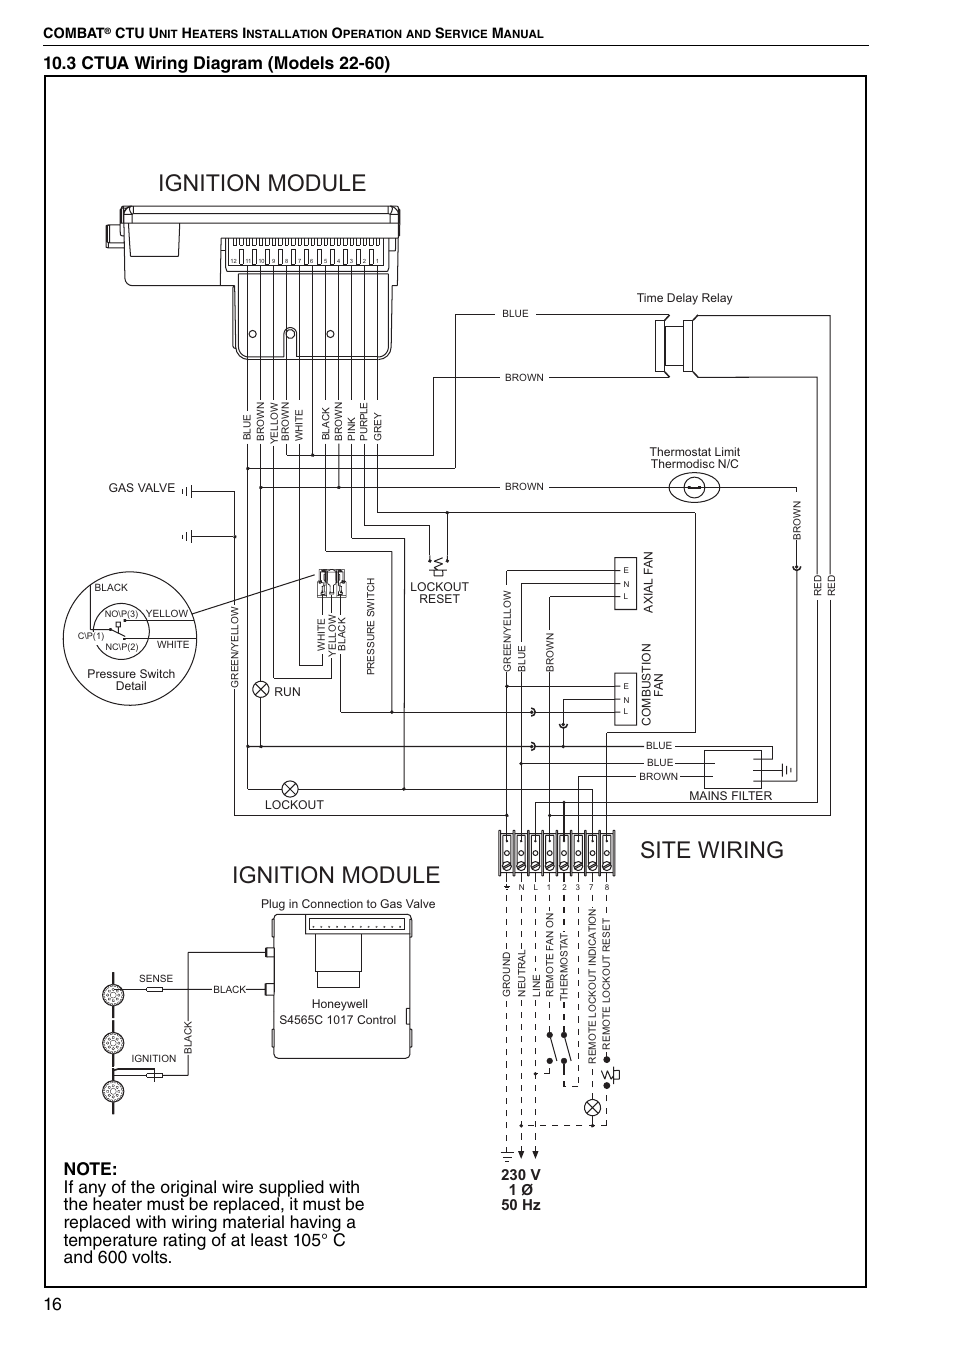 3 ctua wiring diagram (models 22-60), Section 10.3 ... black wire honeywell thermostat wiring 